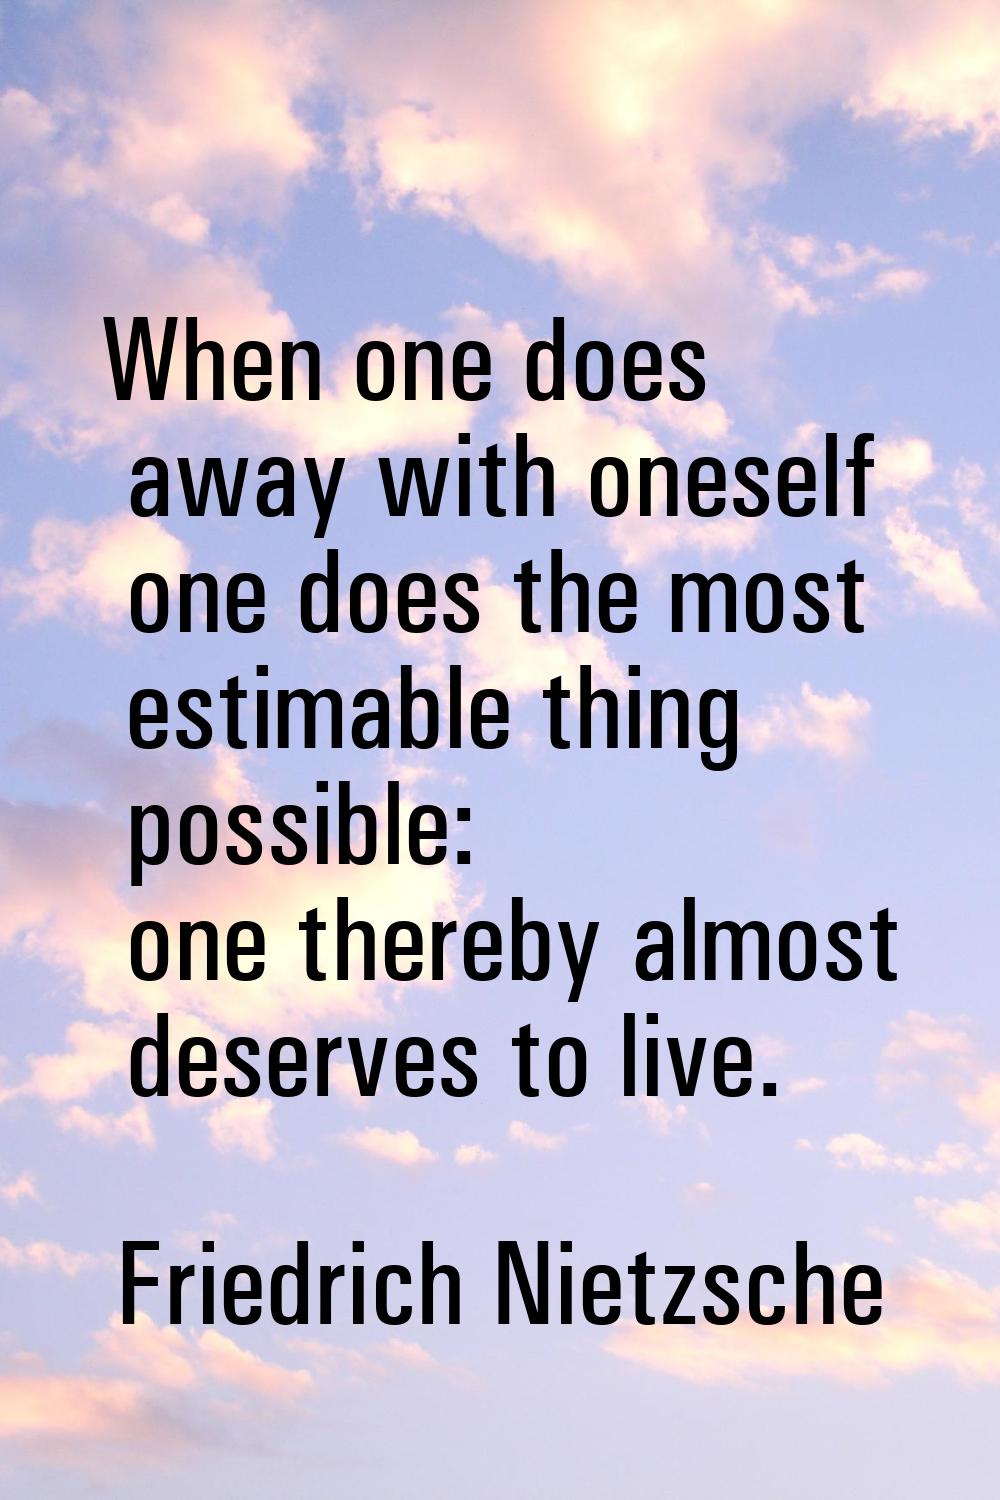 When one does away with oneself one does the most estimable thing possible: one thereby almost dese